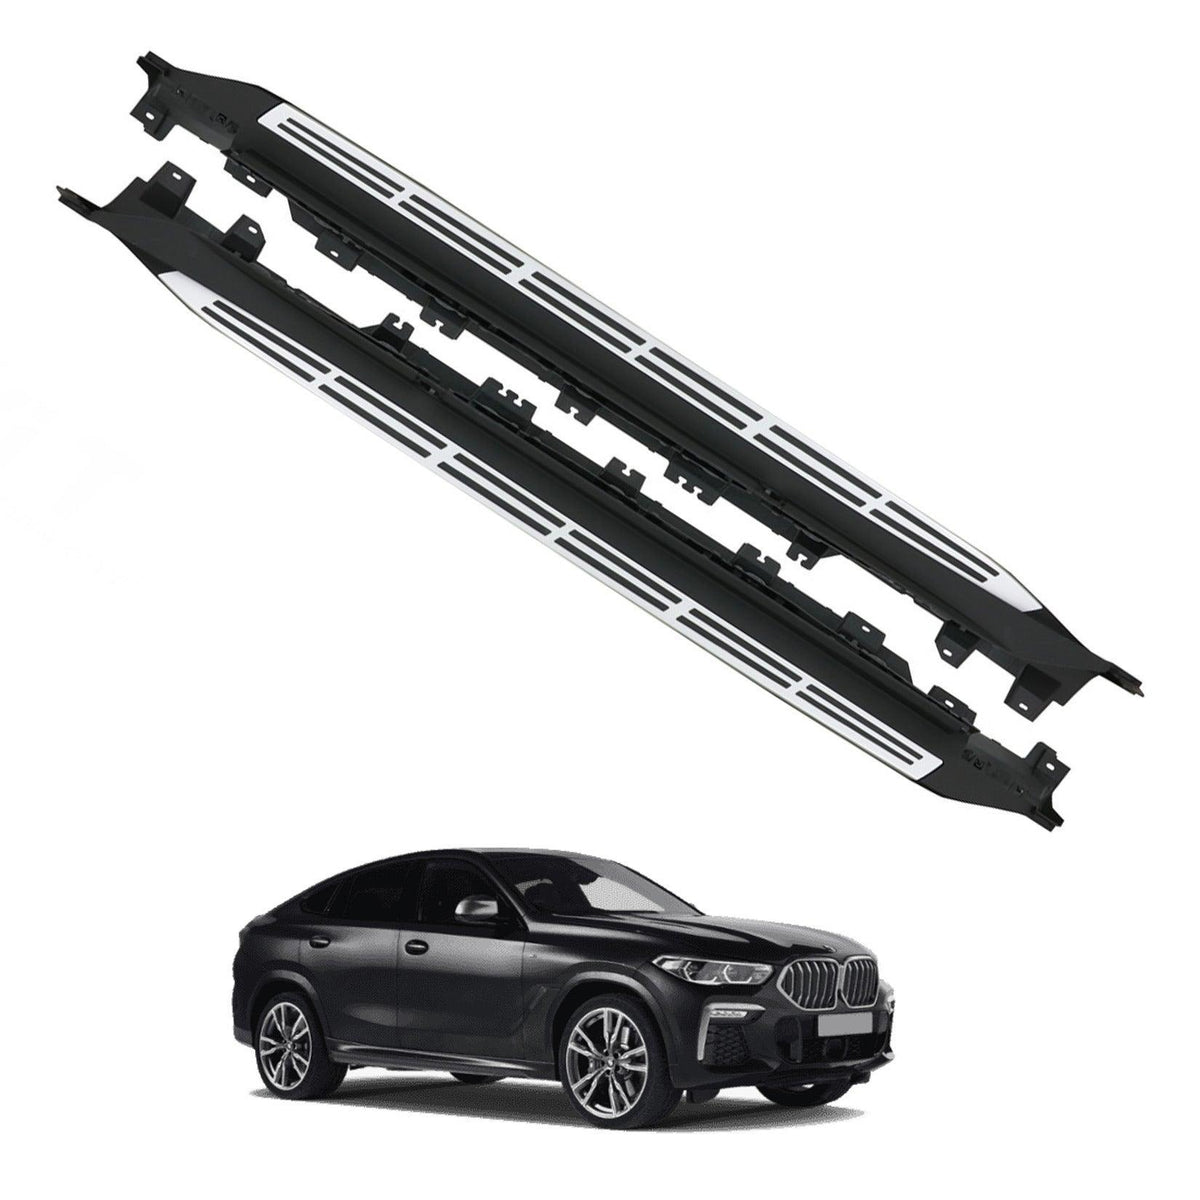 BMW X6 G06 2020 ON OEM STYLE RUNNING BOARDS - SIDE STEP - PAIR - Storm Xccessories2